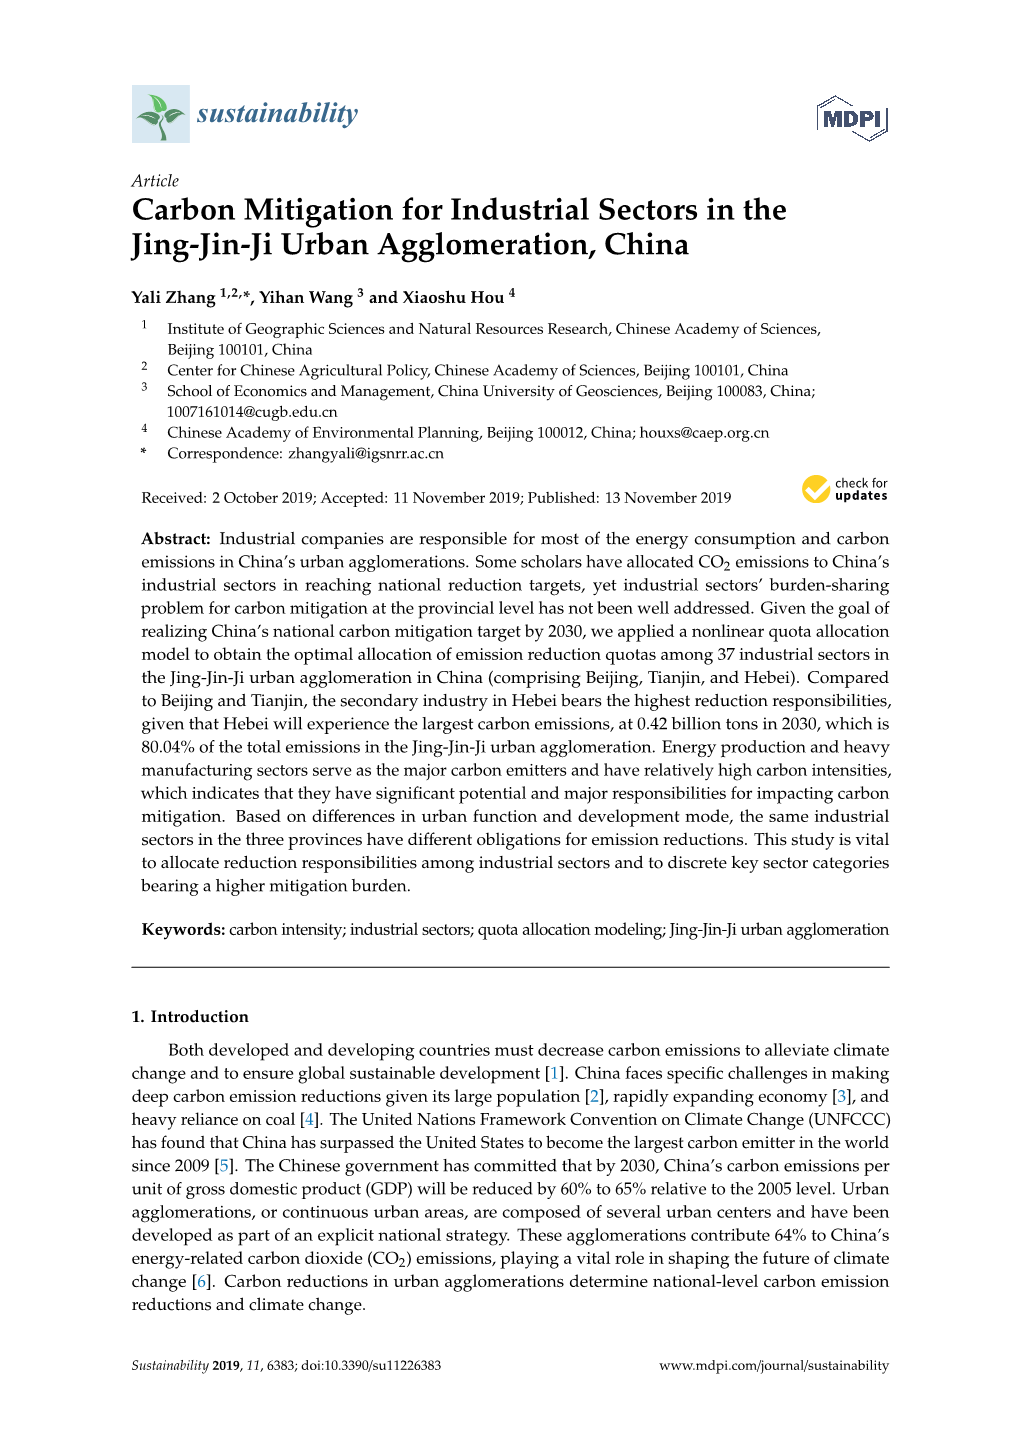 Carbon Mitigation for Industrial Sectors in the Jing-Jin-Ji Urban Agglomeration, China